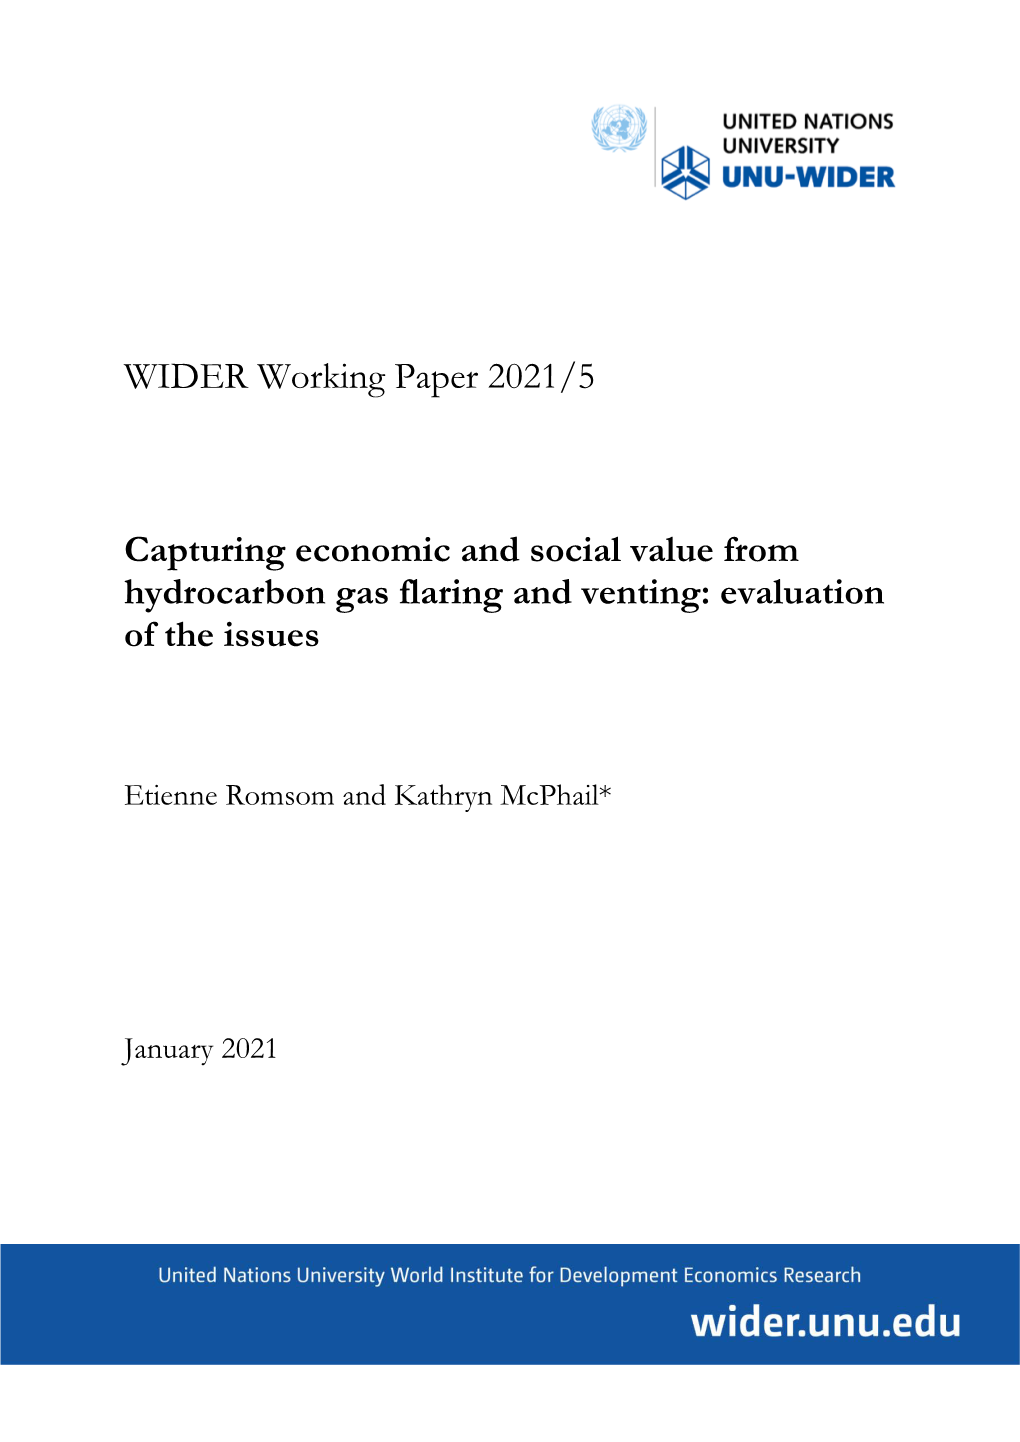 WIDER Working Paper 2021/5-Capturing Economic and Social Value from Hydrocarbon Gas Flaring and Venting: Evaluation of the Issue